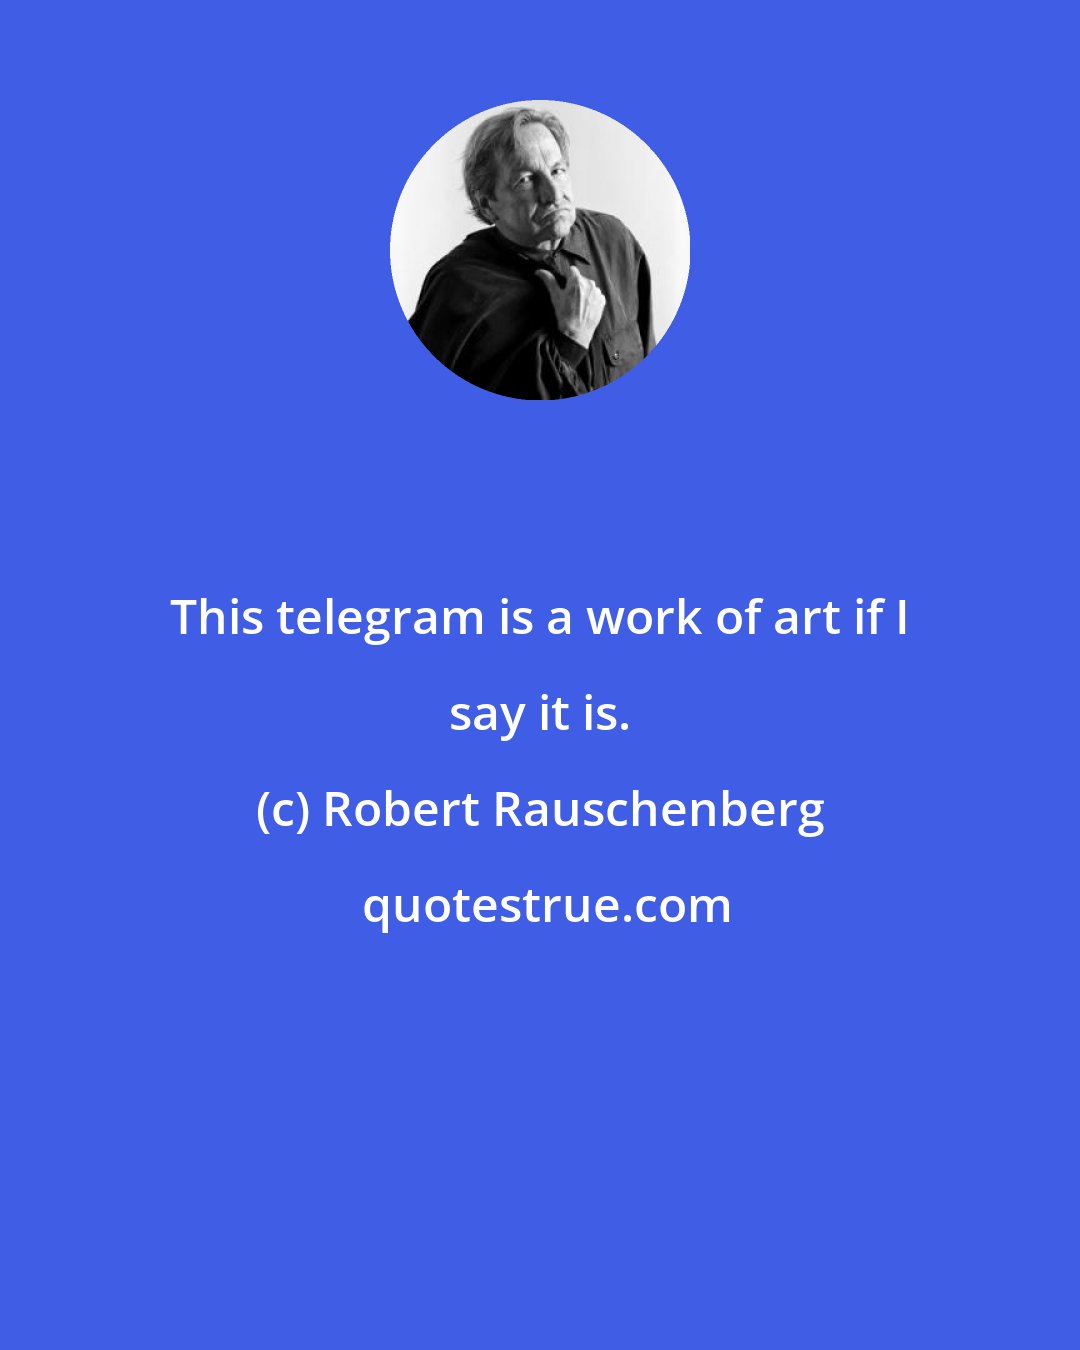 Robert Rauschenberg: This telegram is a work of art if I say it is.